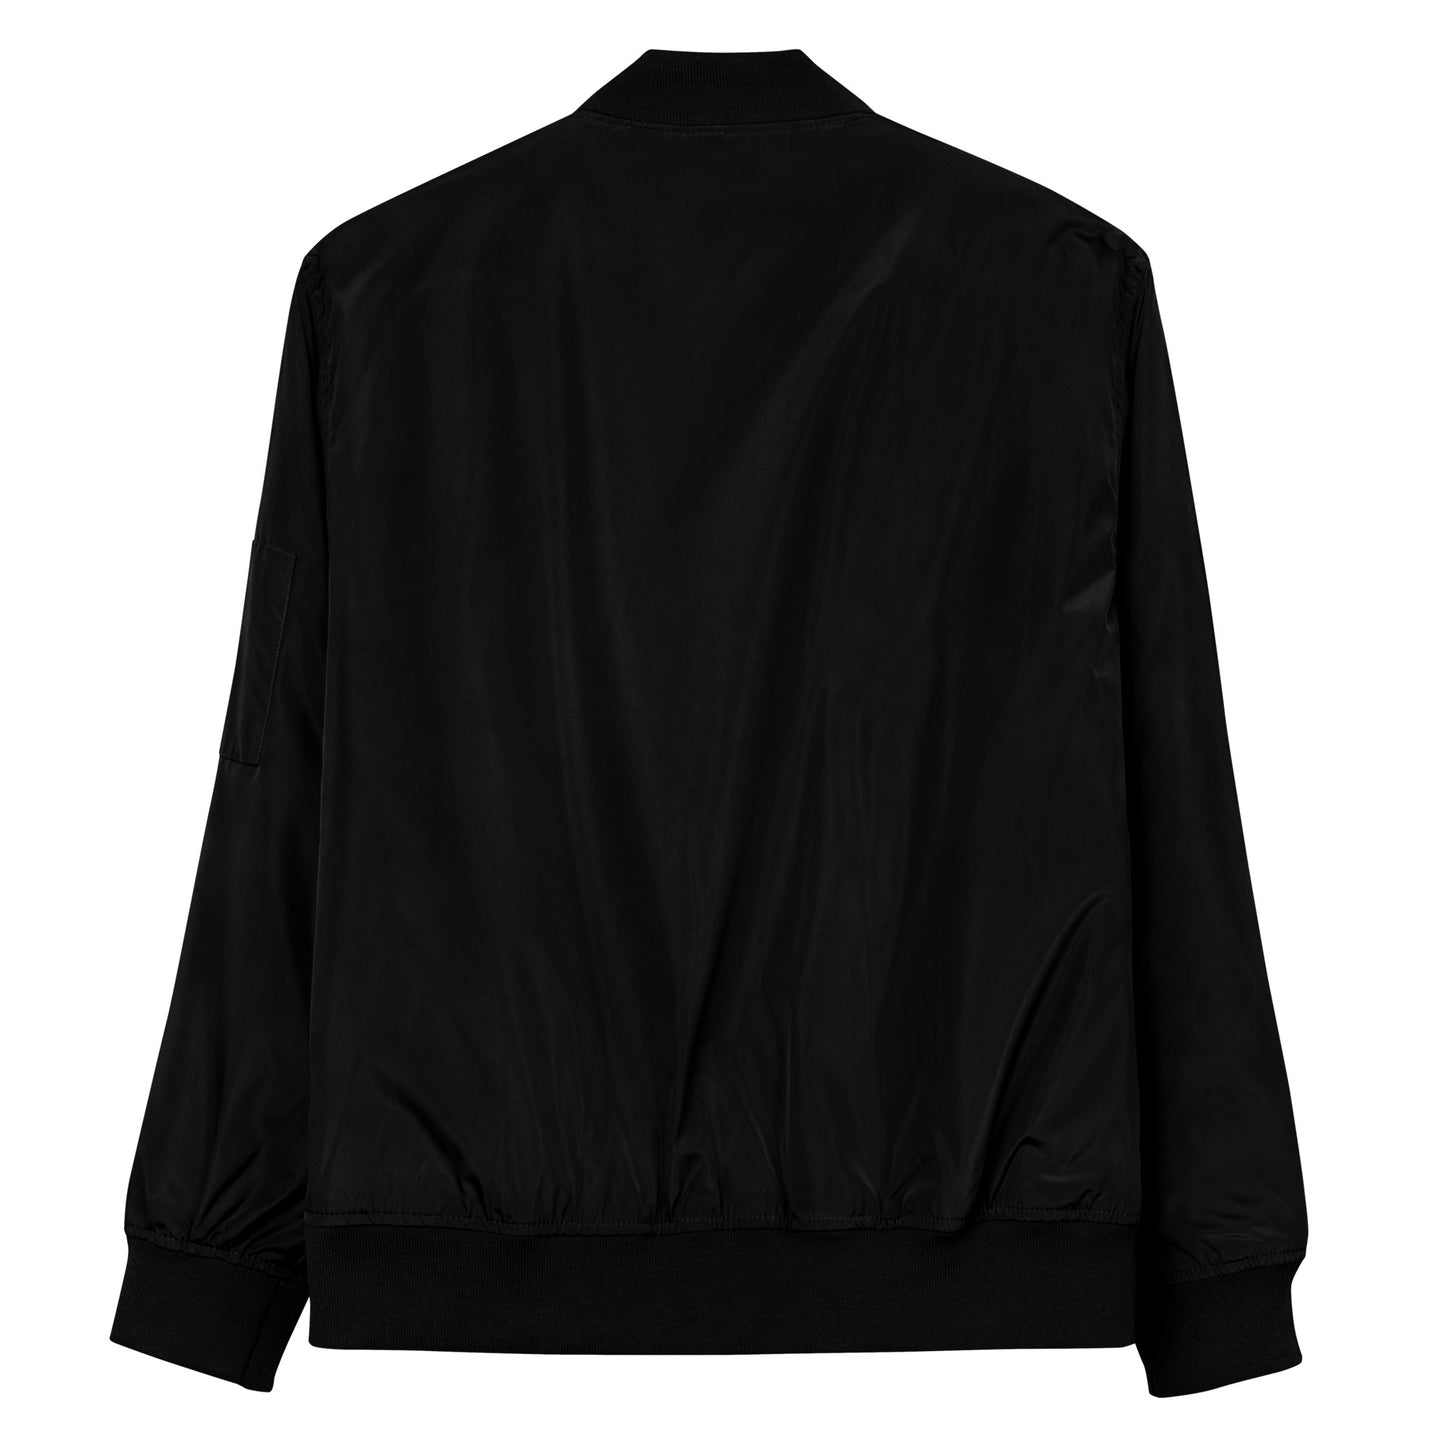 Stealth Premium recycled bomber jacket